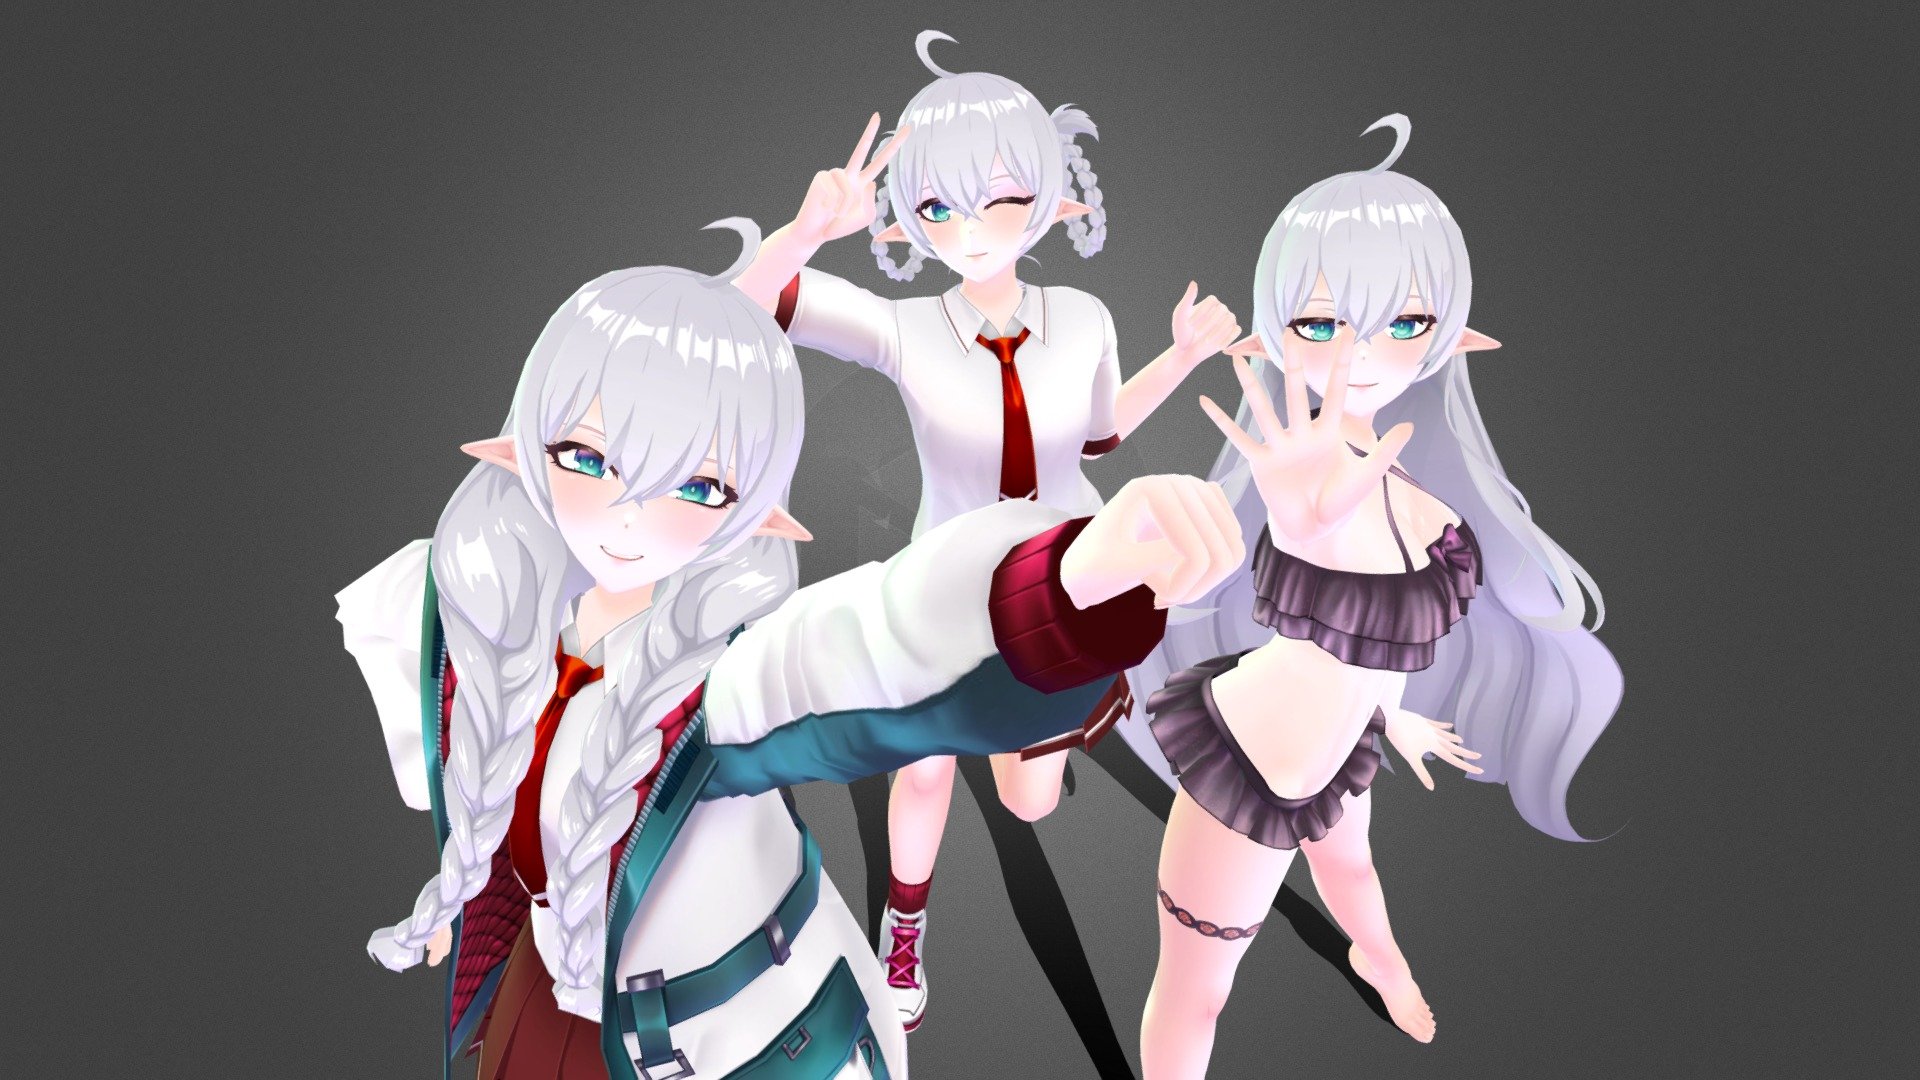 Commission work for VRchat avatar by Chtholly . Modeled and rigged in blender 3.3 and textured using blender and photoshot 3d model